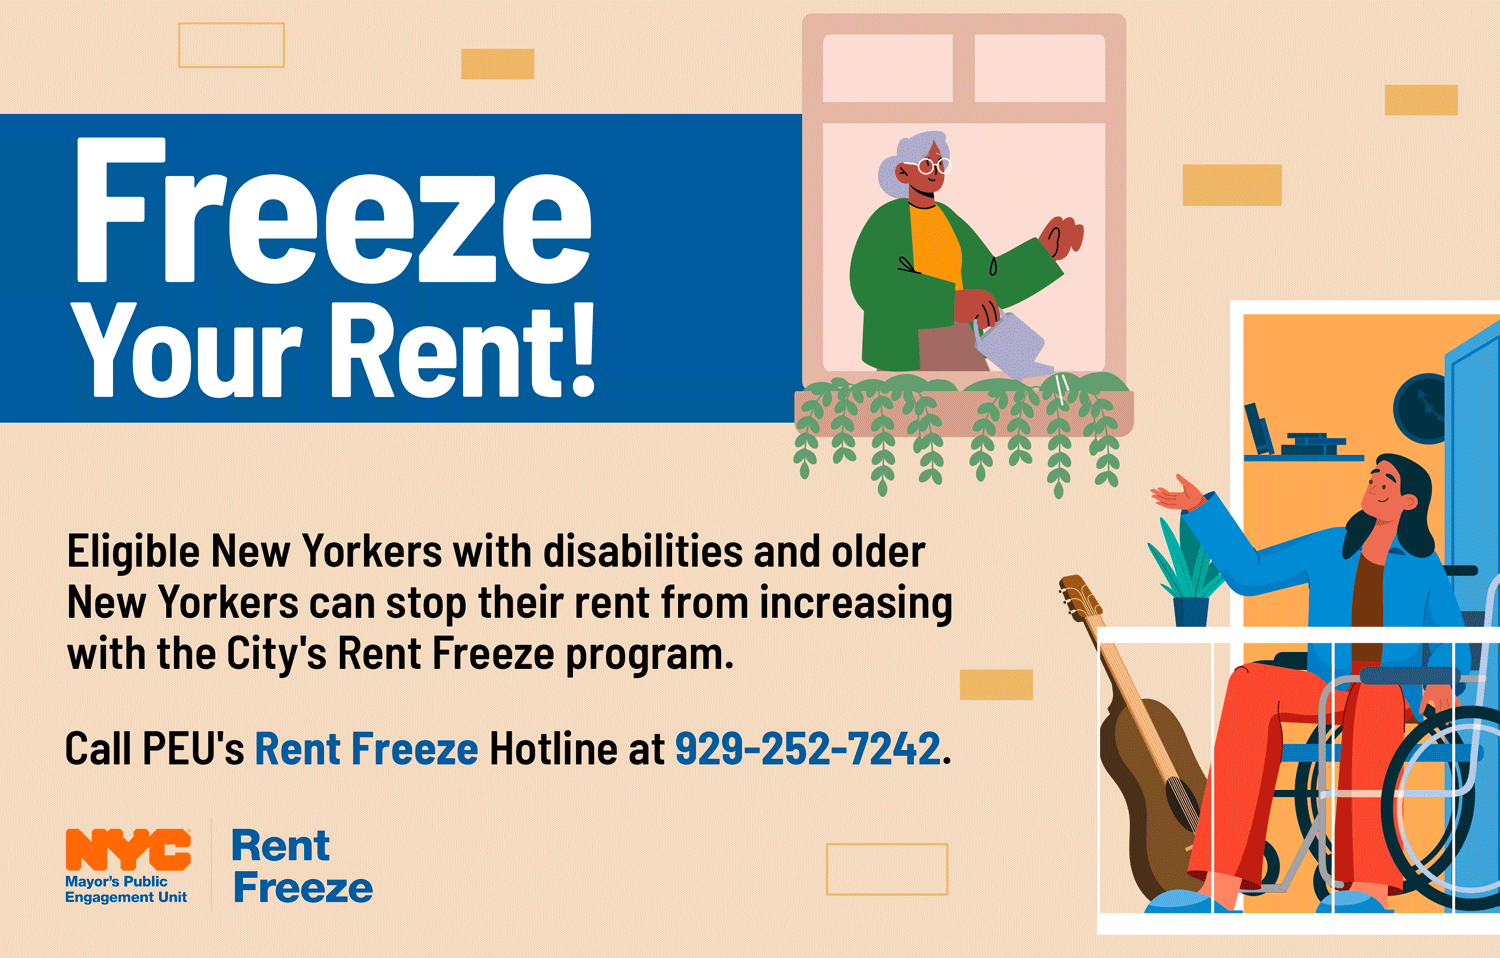 Freeze Your Rent: learn more about Rent Freeze and get help from P E U
                                           